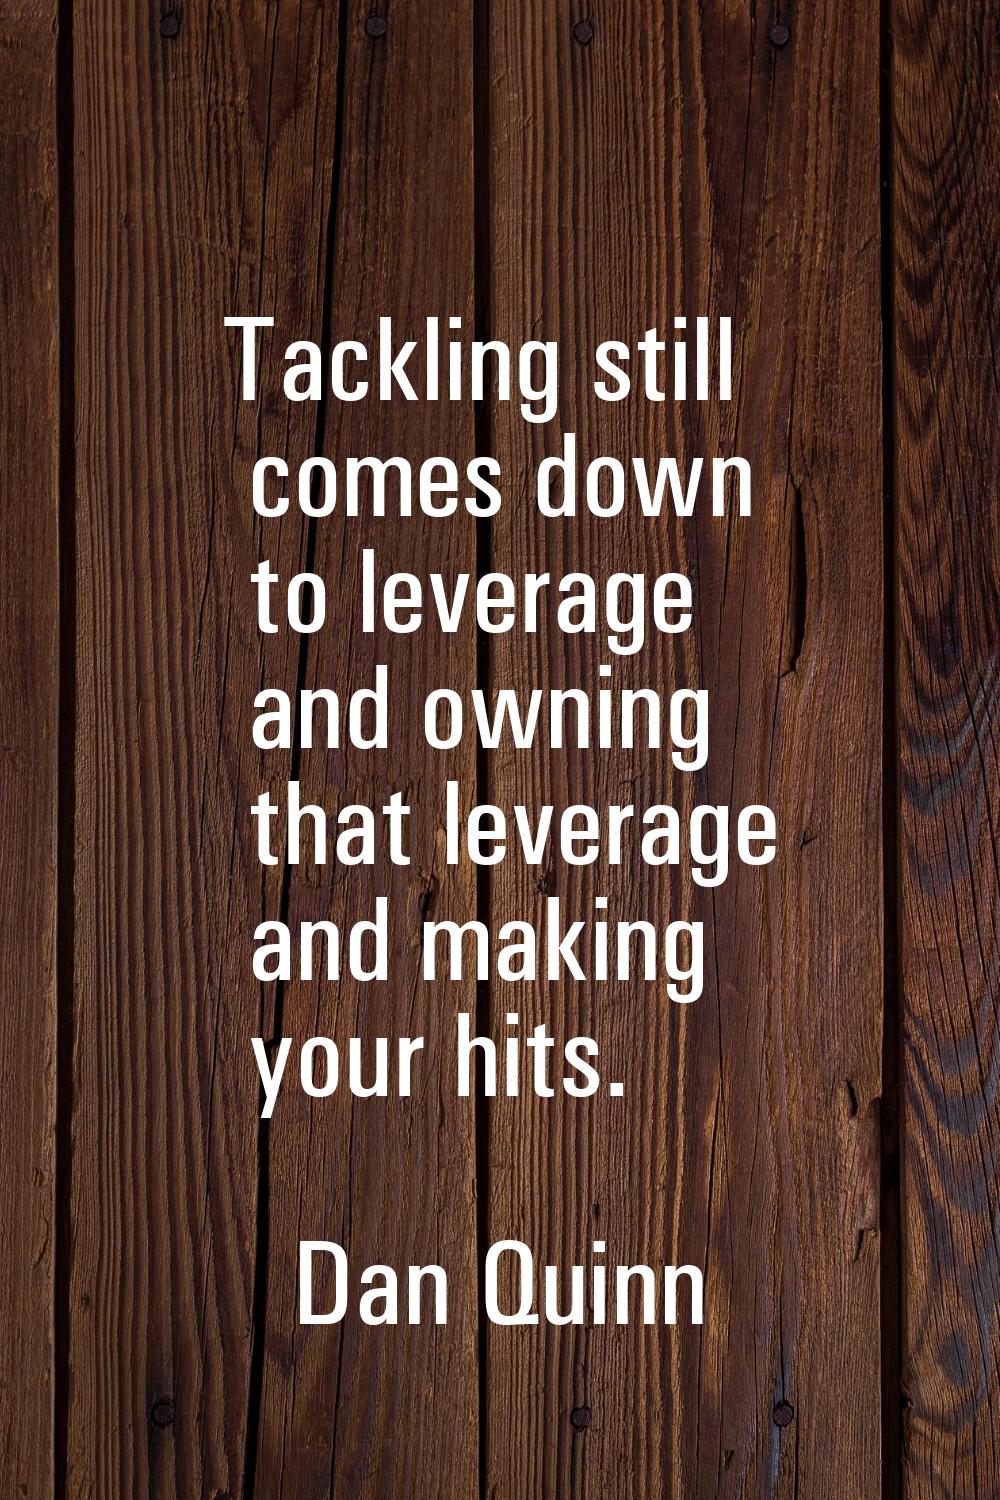 Tackling still comes down to leverage and owning that leverage and making your hits.